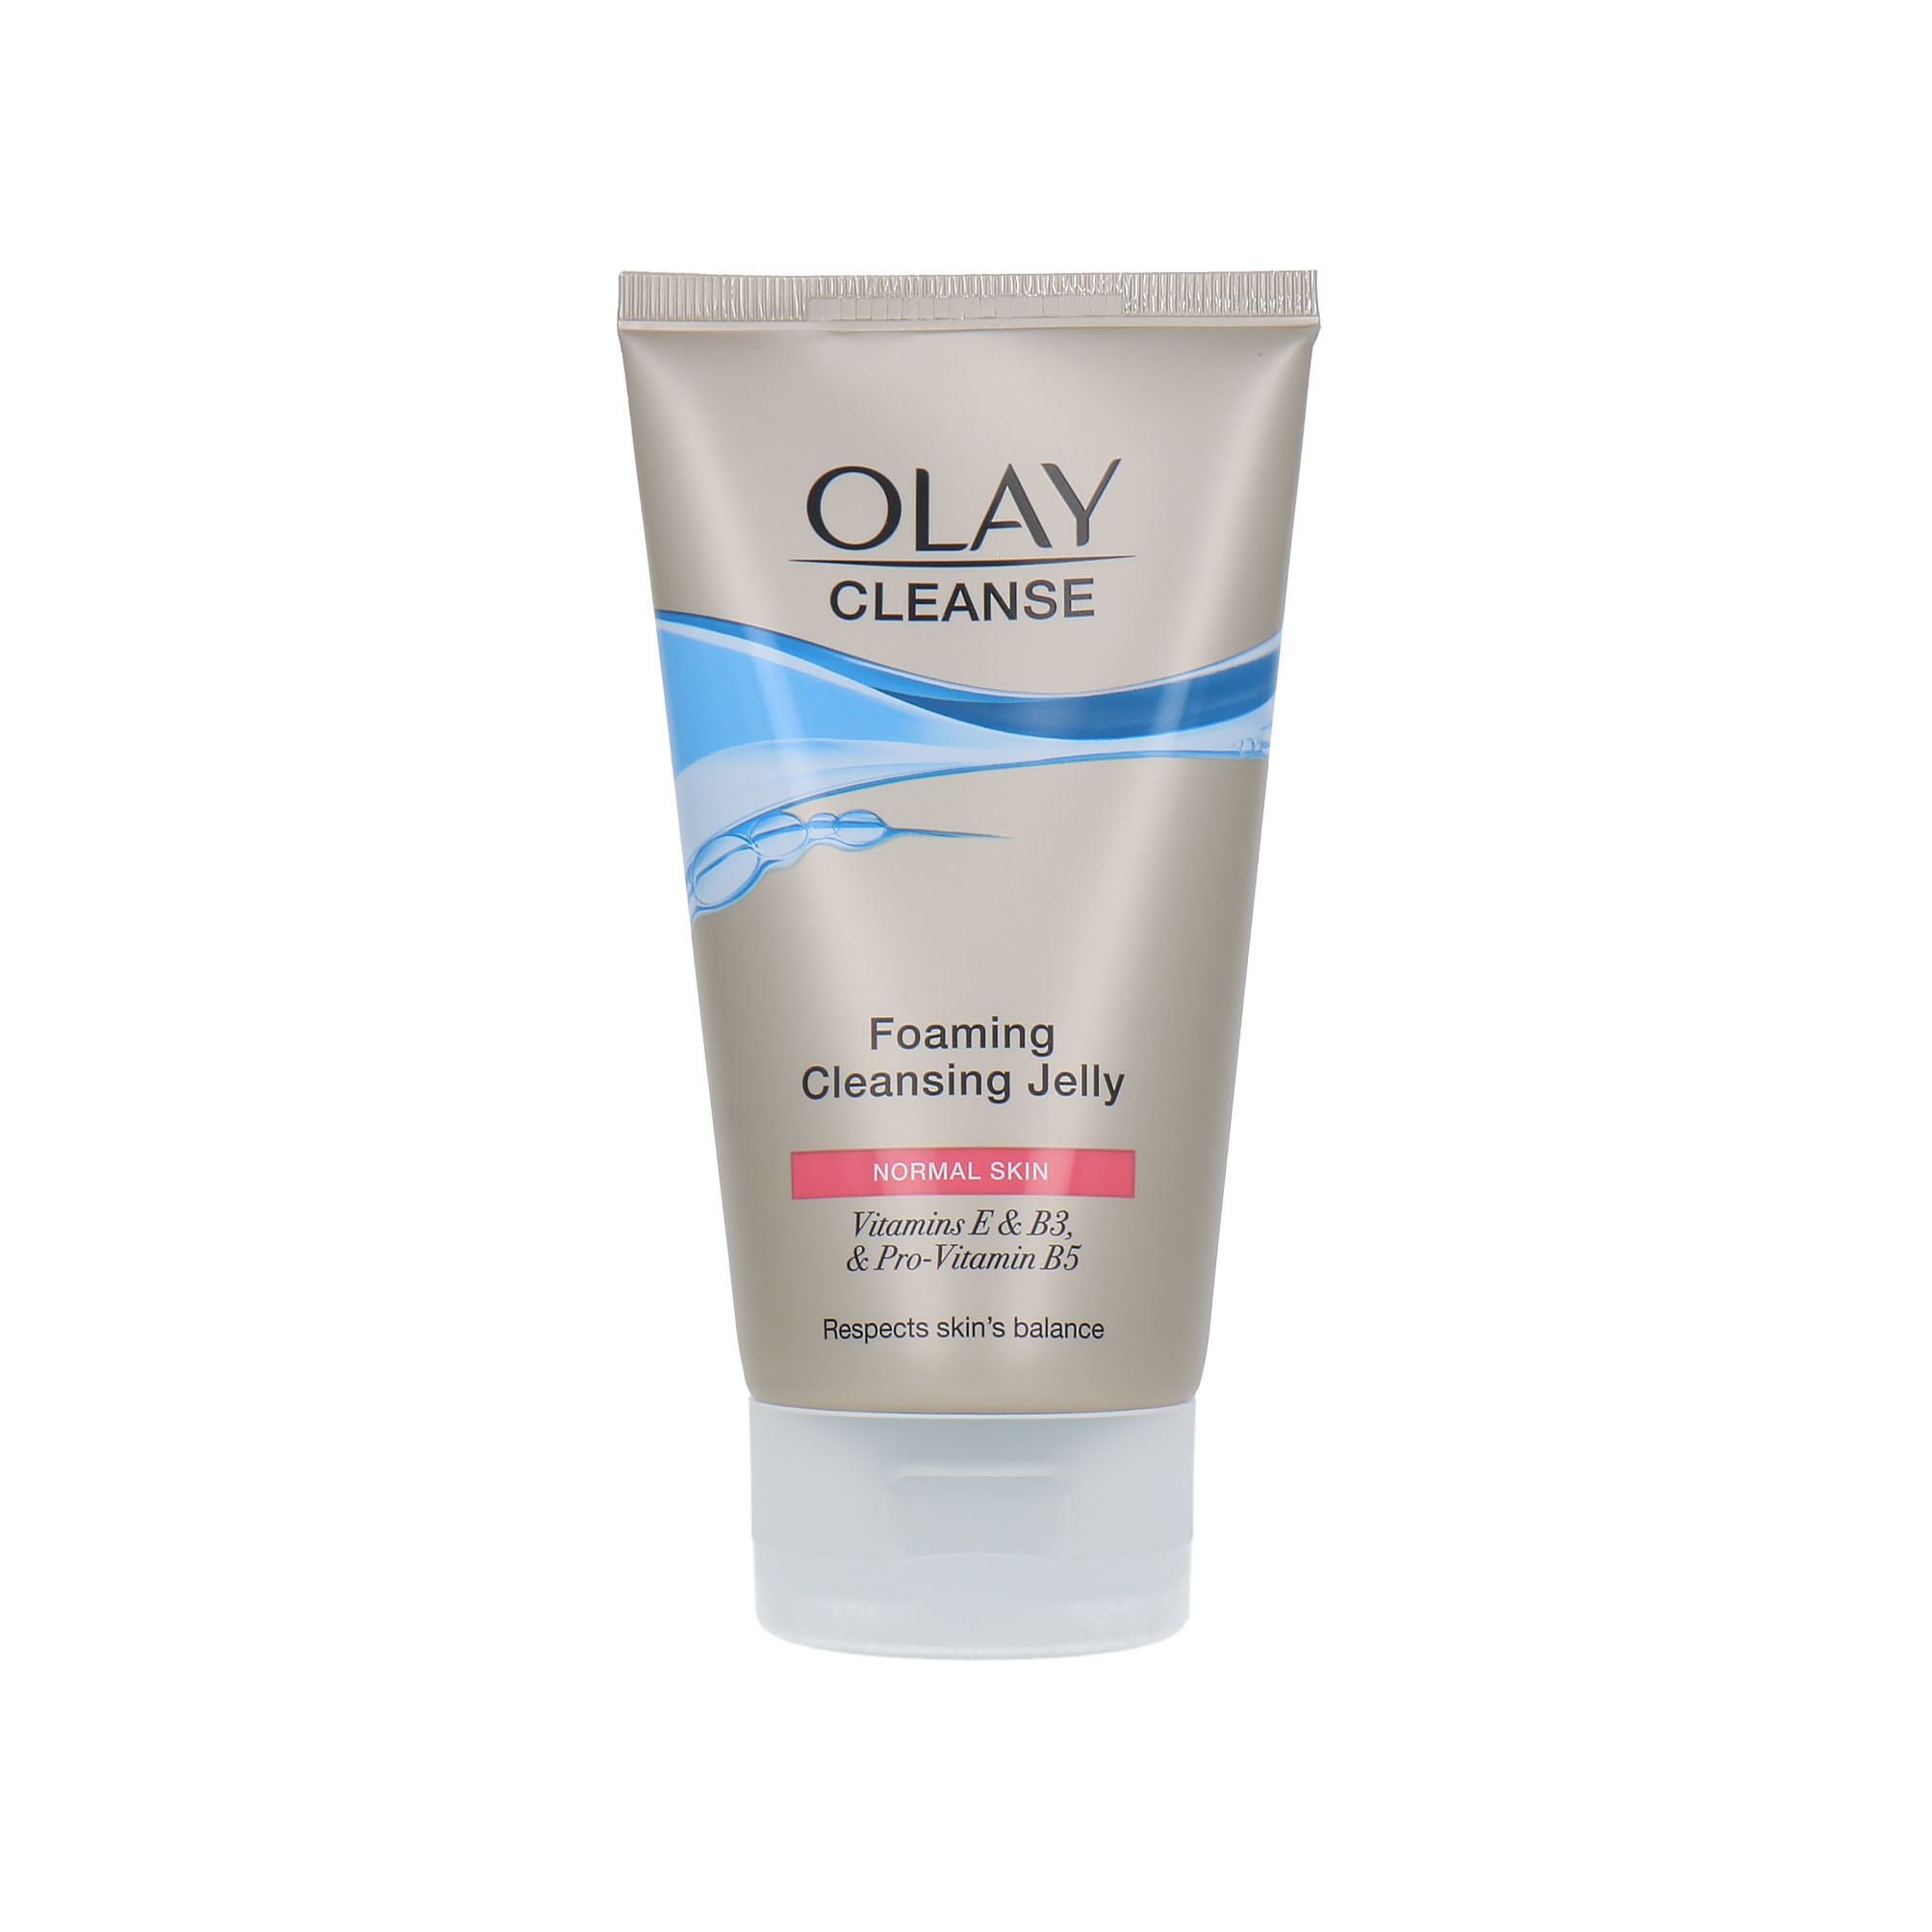 Olay Cleanse Foaming Cleansing Jelly - 150 ml